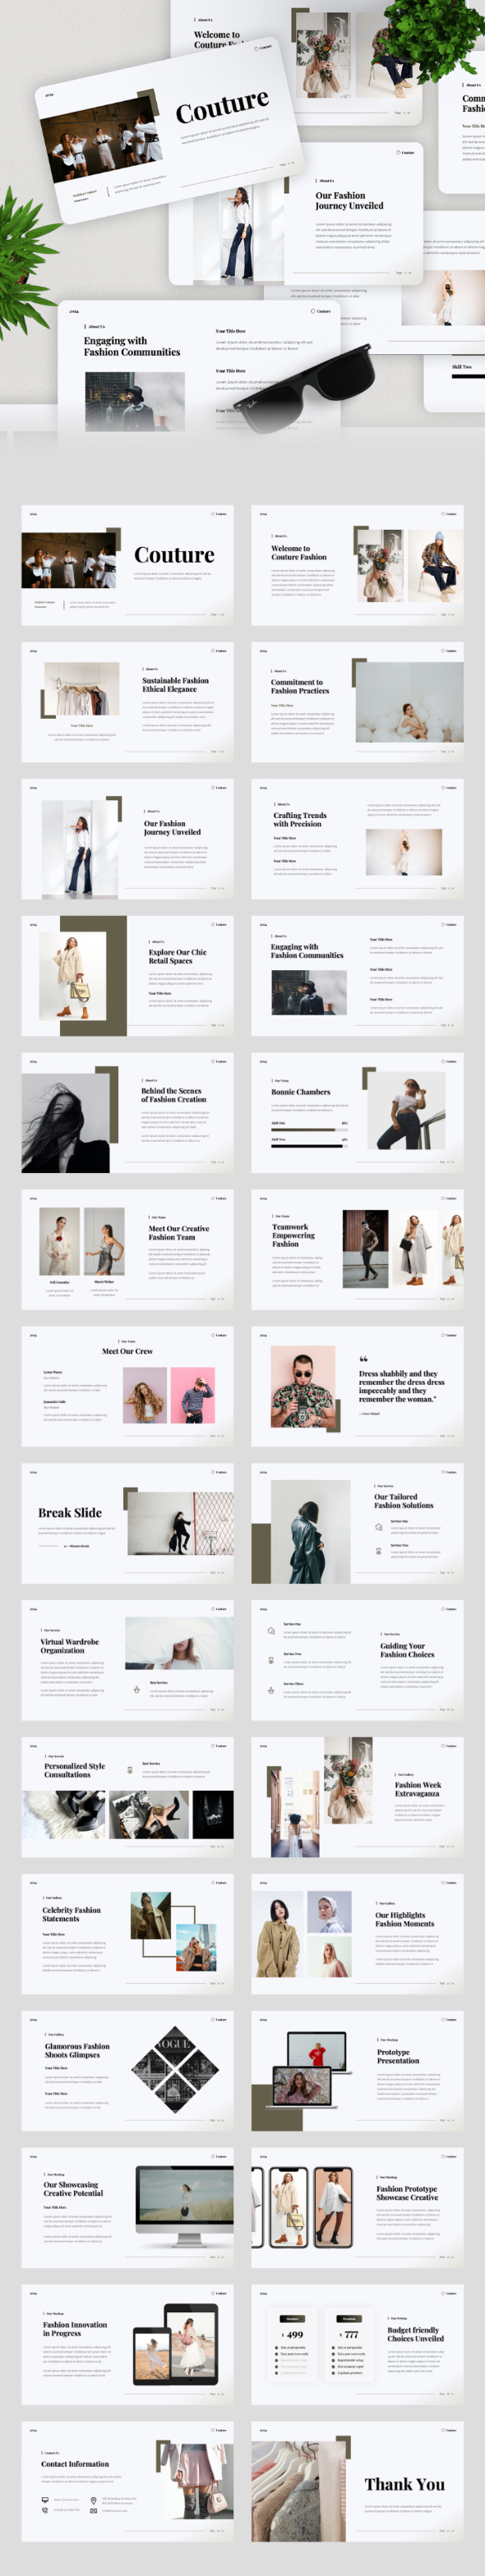 [DOWNLOAD]Couture - Fashion PowerPoint Template